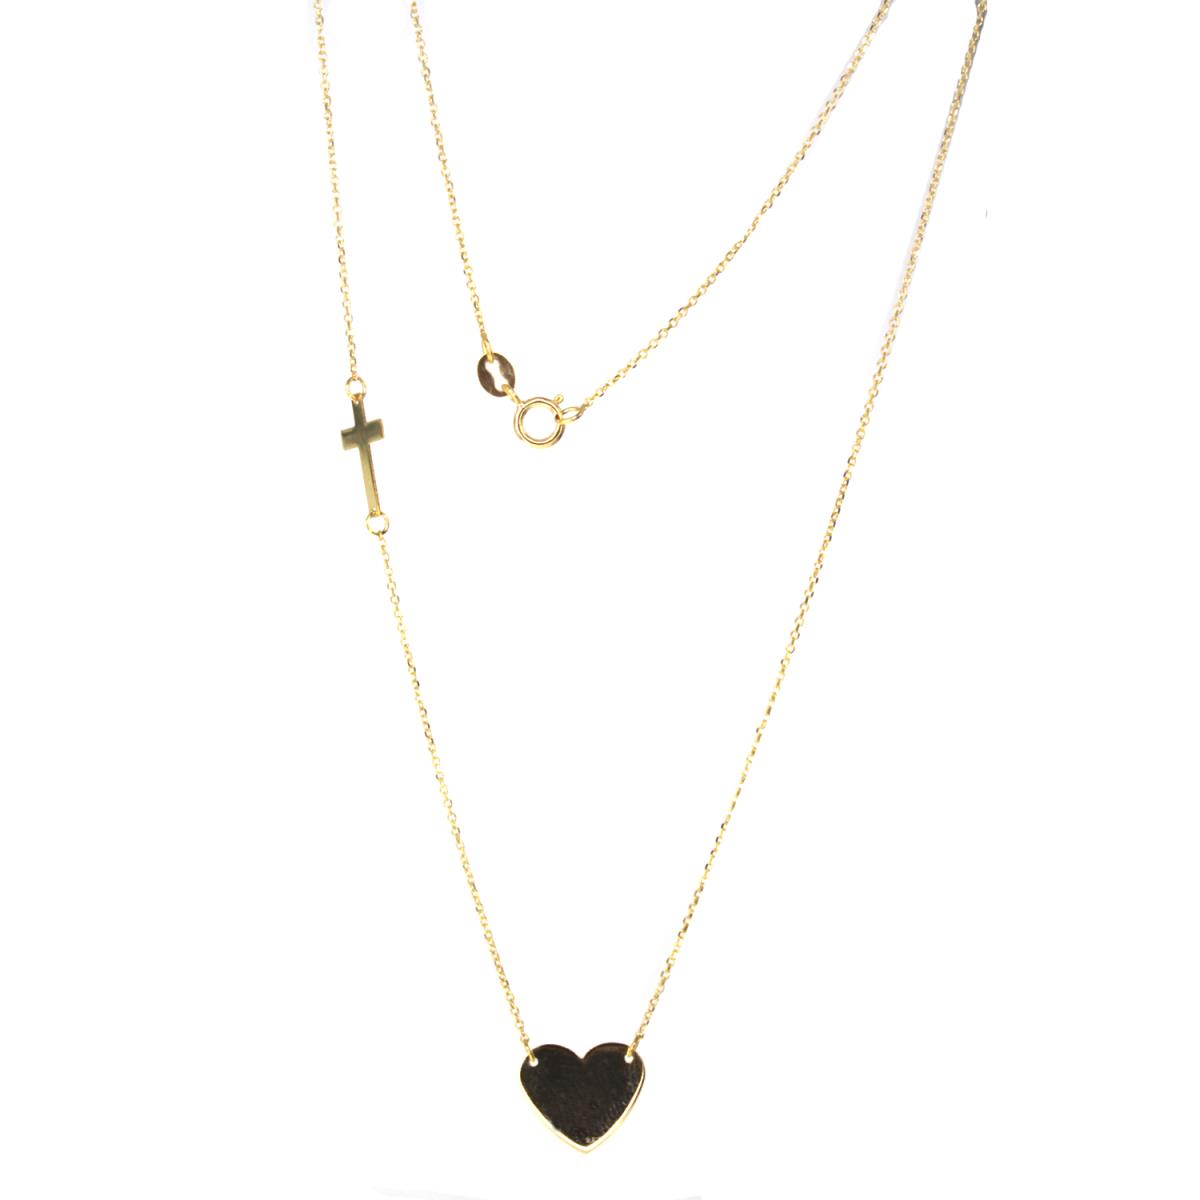 10K Yellow Gold DC Polished Heart Charm and Sideways Cross 18" Necklace